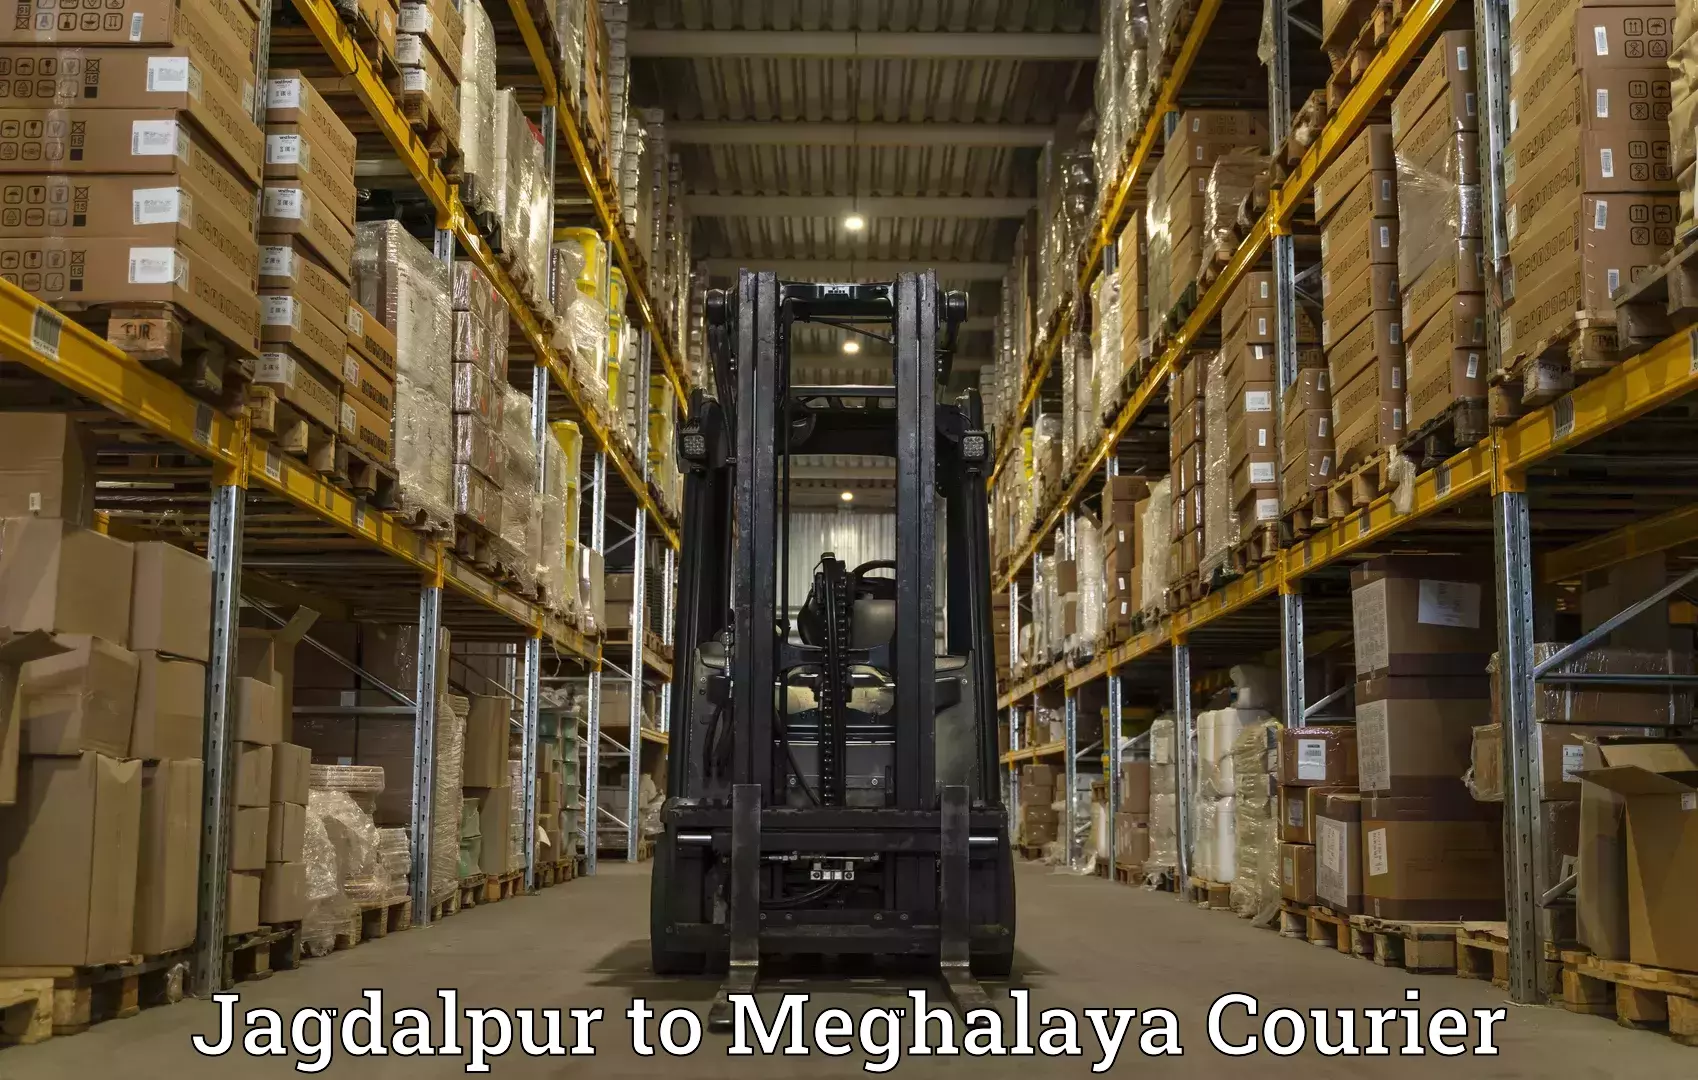 State-of-the-art courier technology Jagdalpur to Meghalaya